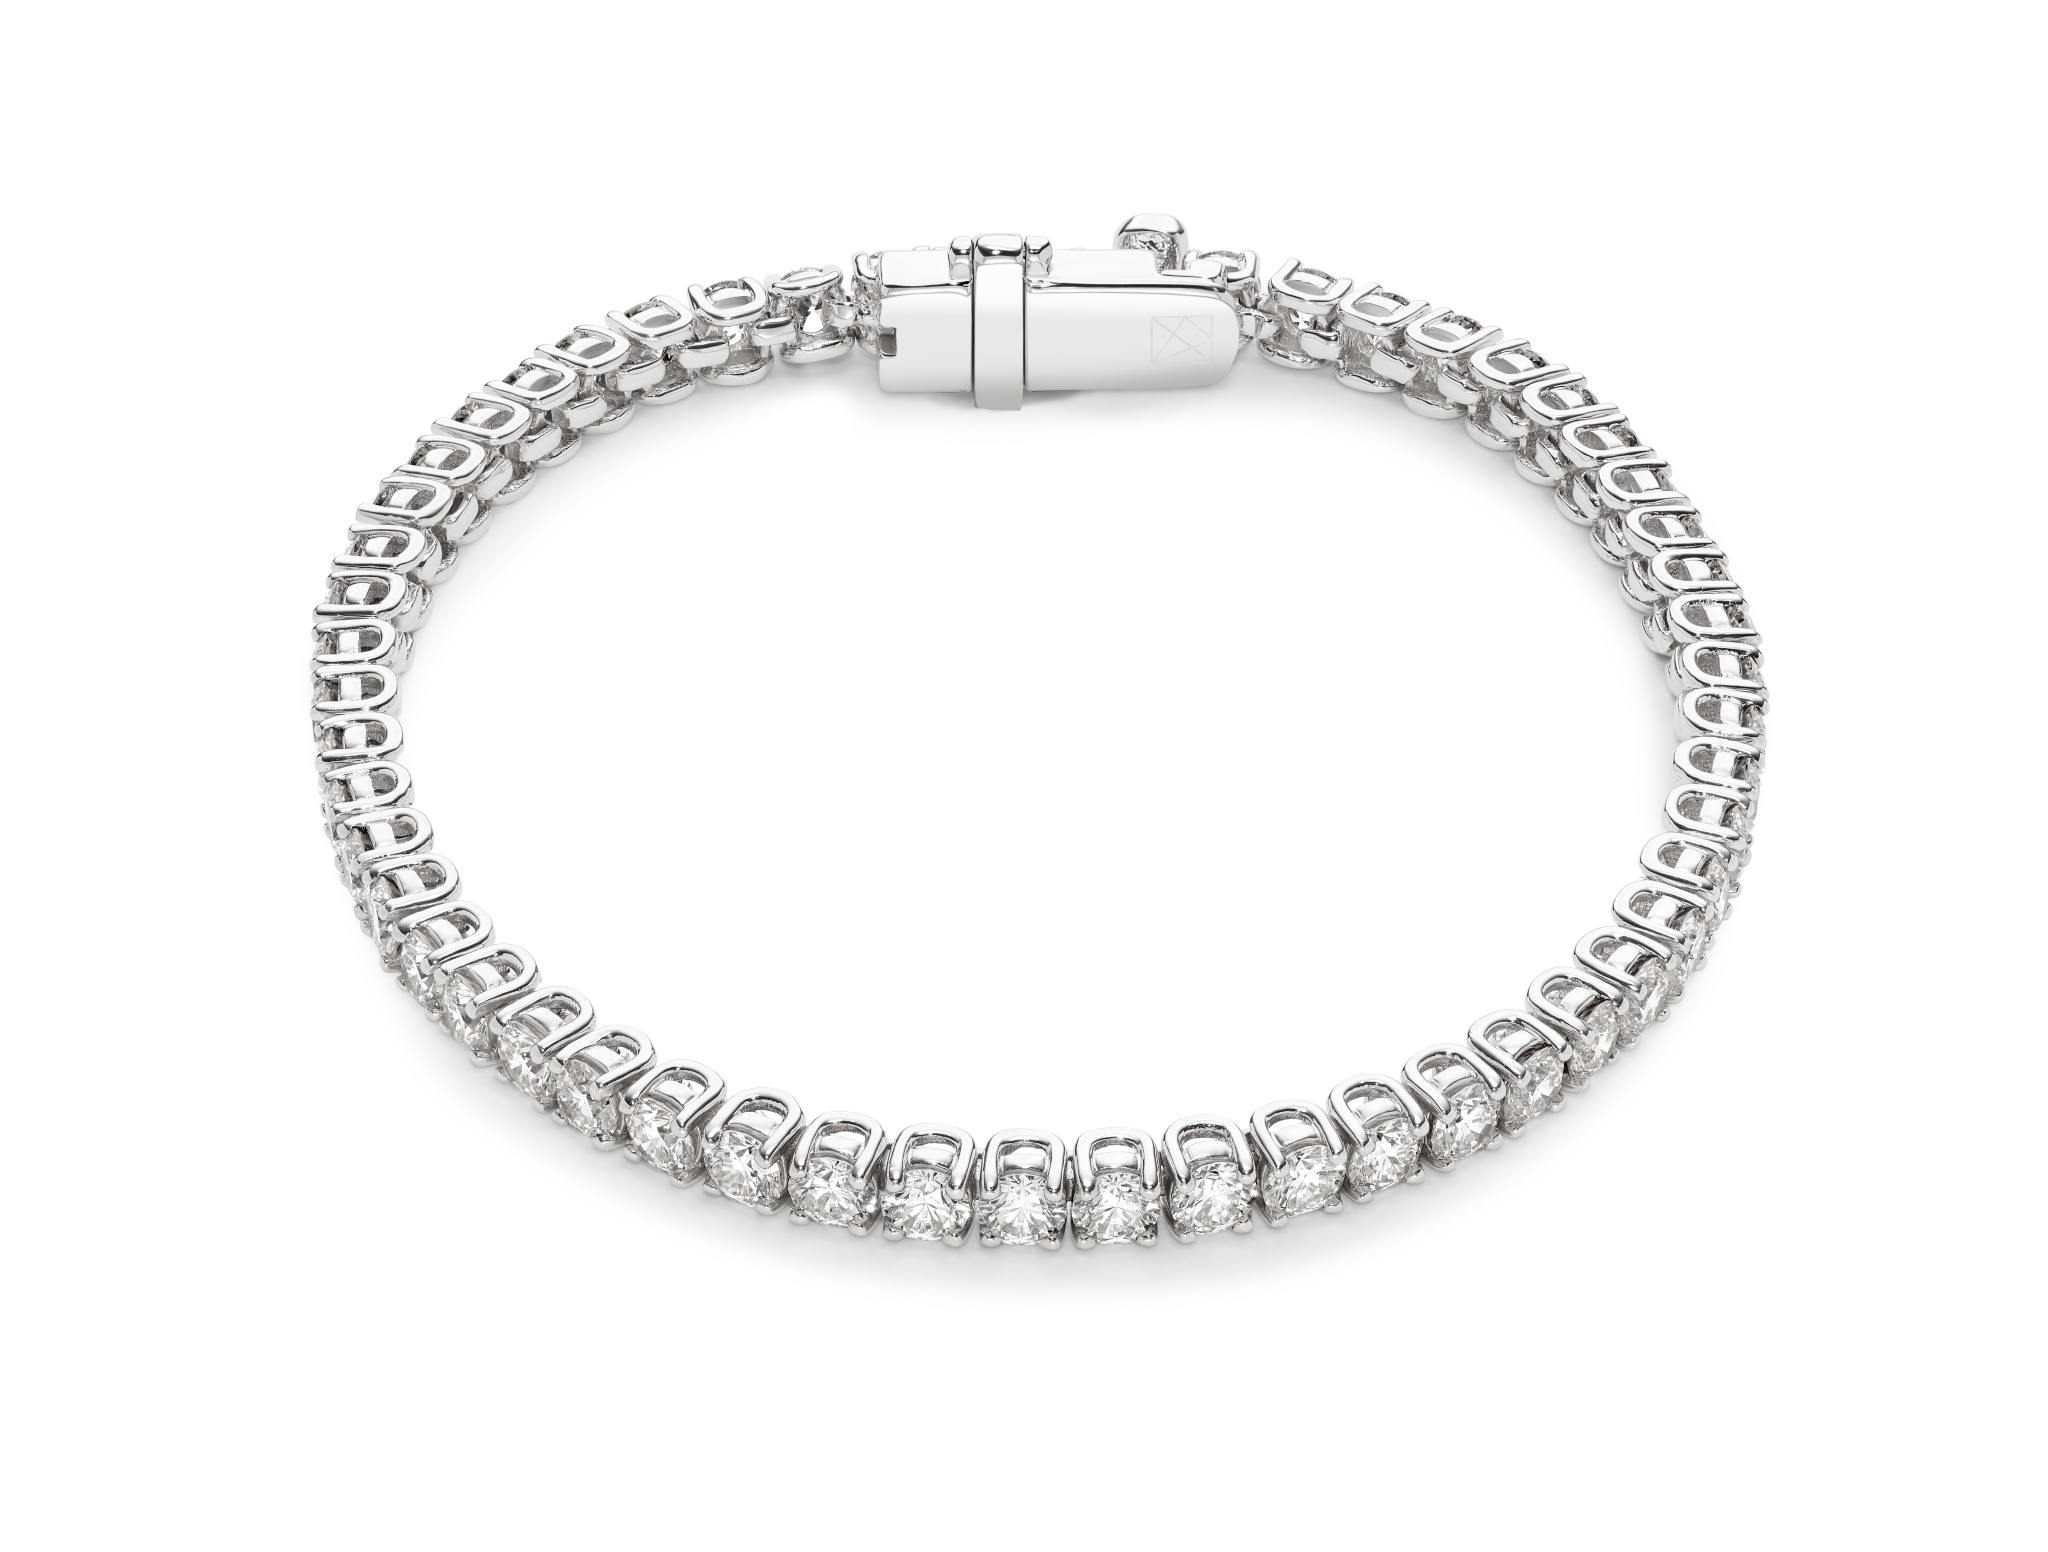 Overview of small tennis bracelet